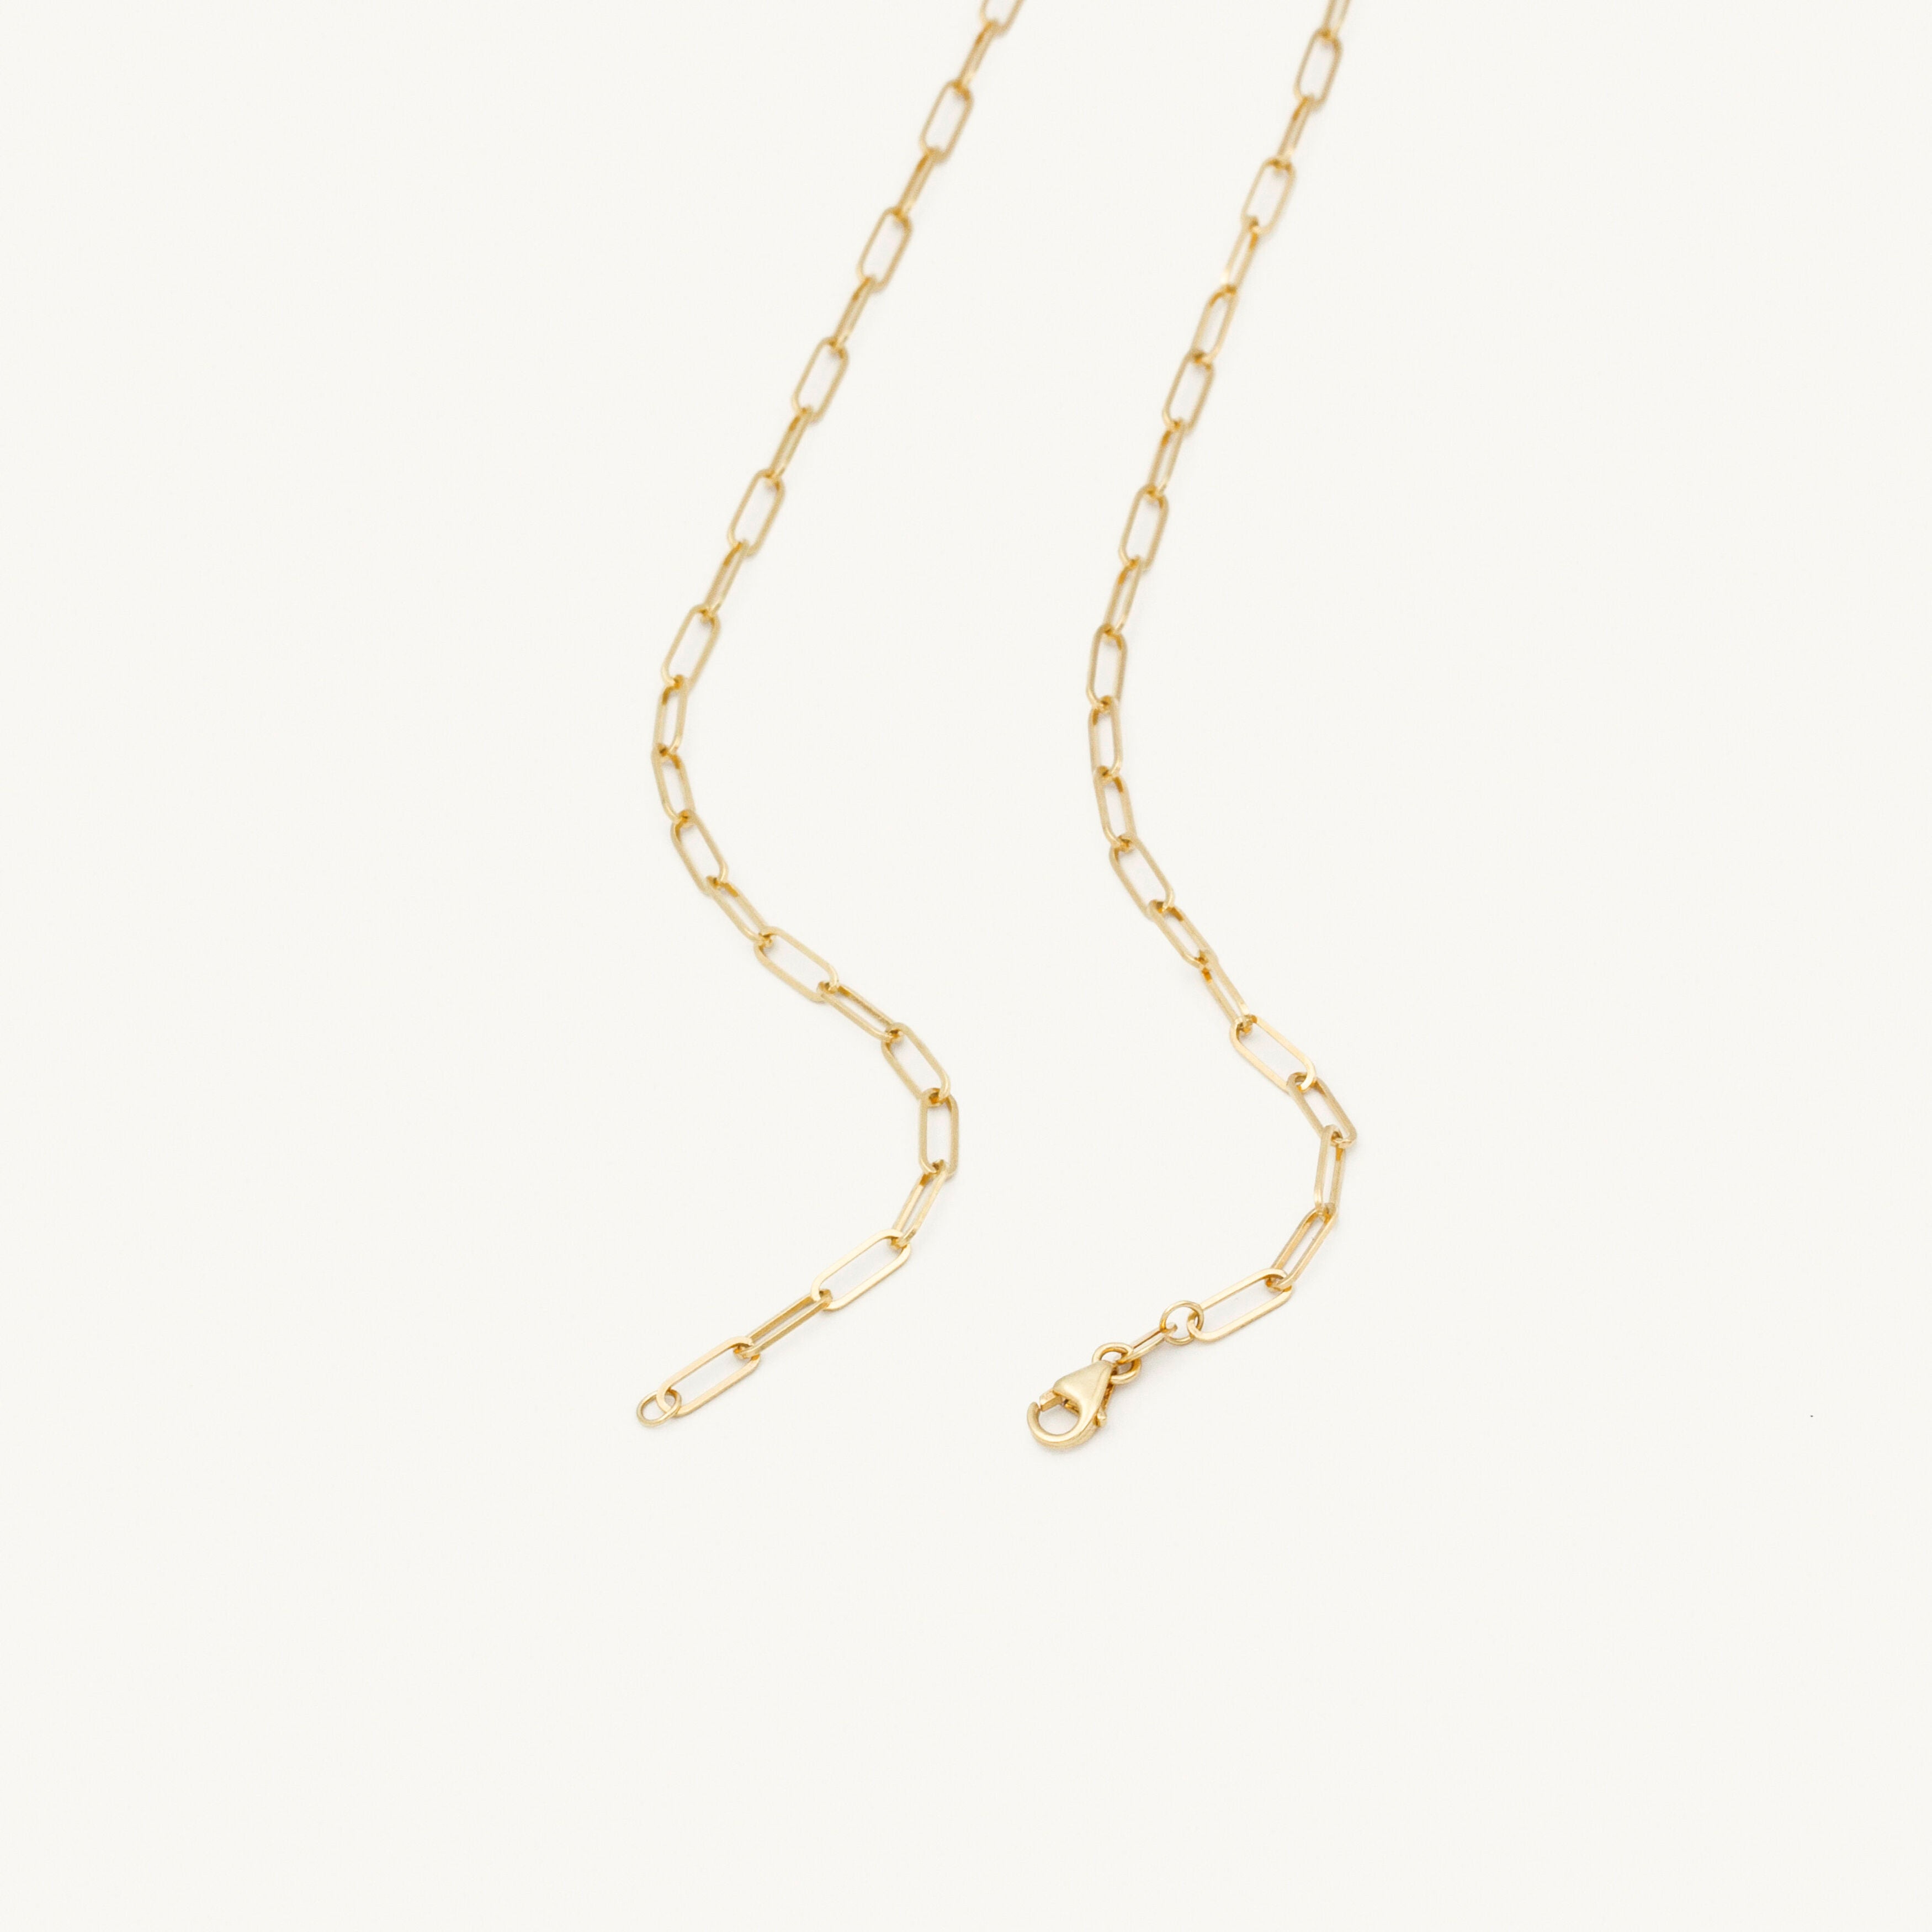 14K GOLD THIN PAPERCLIP NECKLACE CHAIN WOMEN